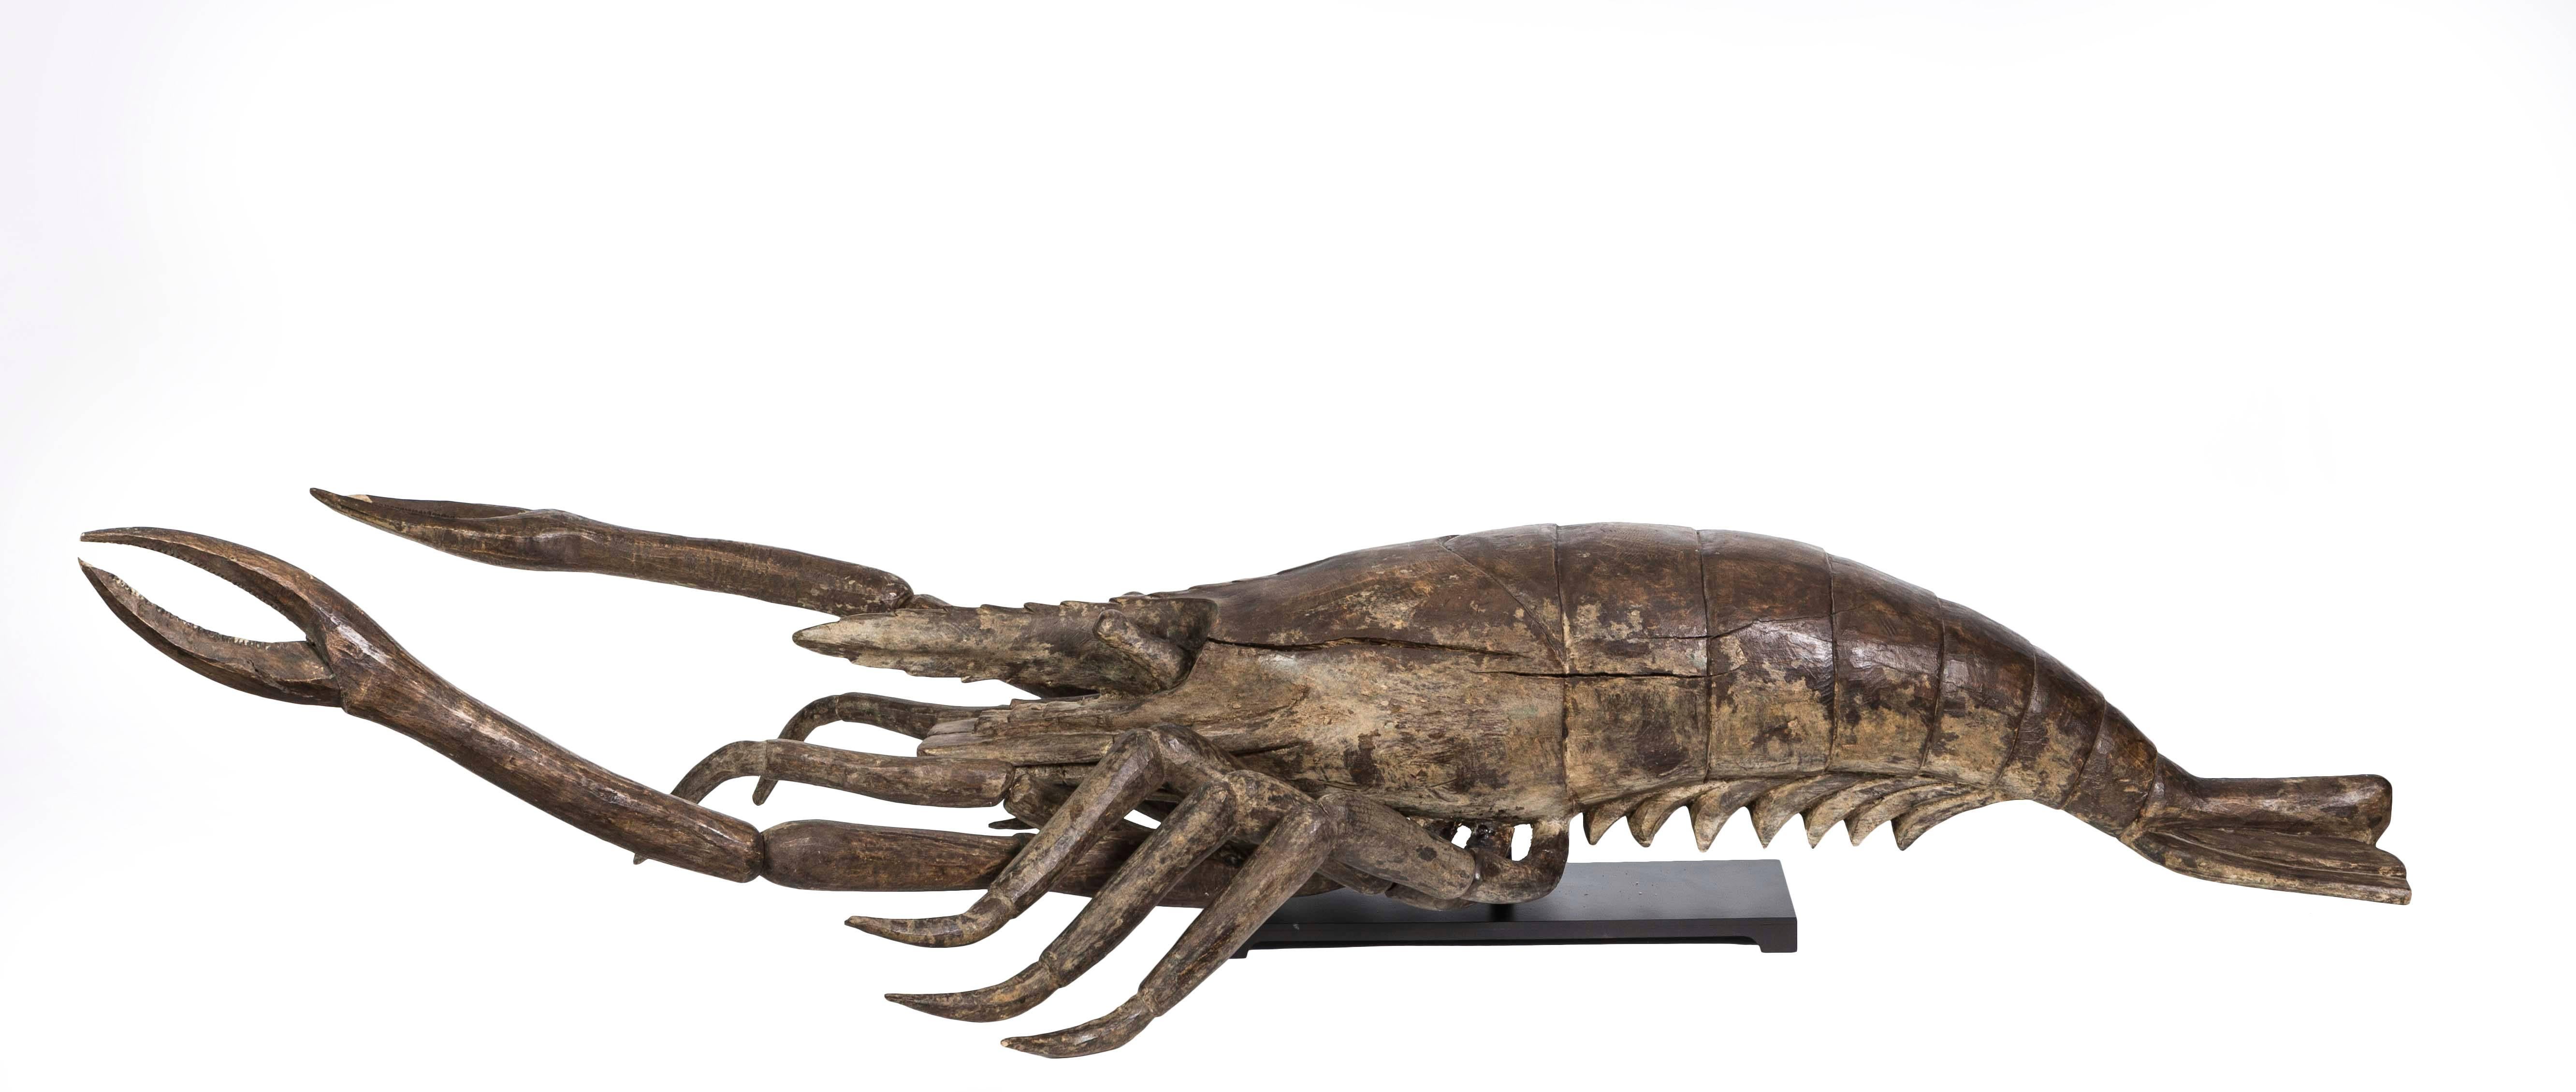 This large scale 19th Century Folk Art articulated wooden carved lobster/shrimp crustacean sculpture is very unique and unusual.  The lobster is mounted on a custom iron stand made to hold the legs and tentacles  a couple of inches off a table. This